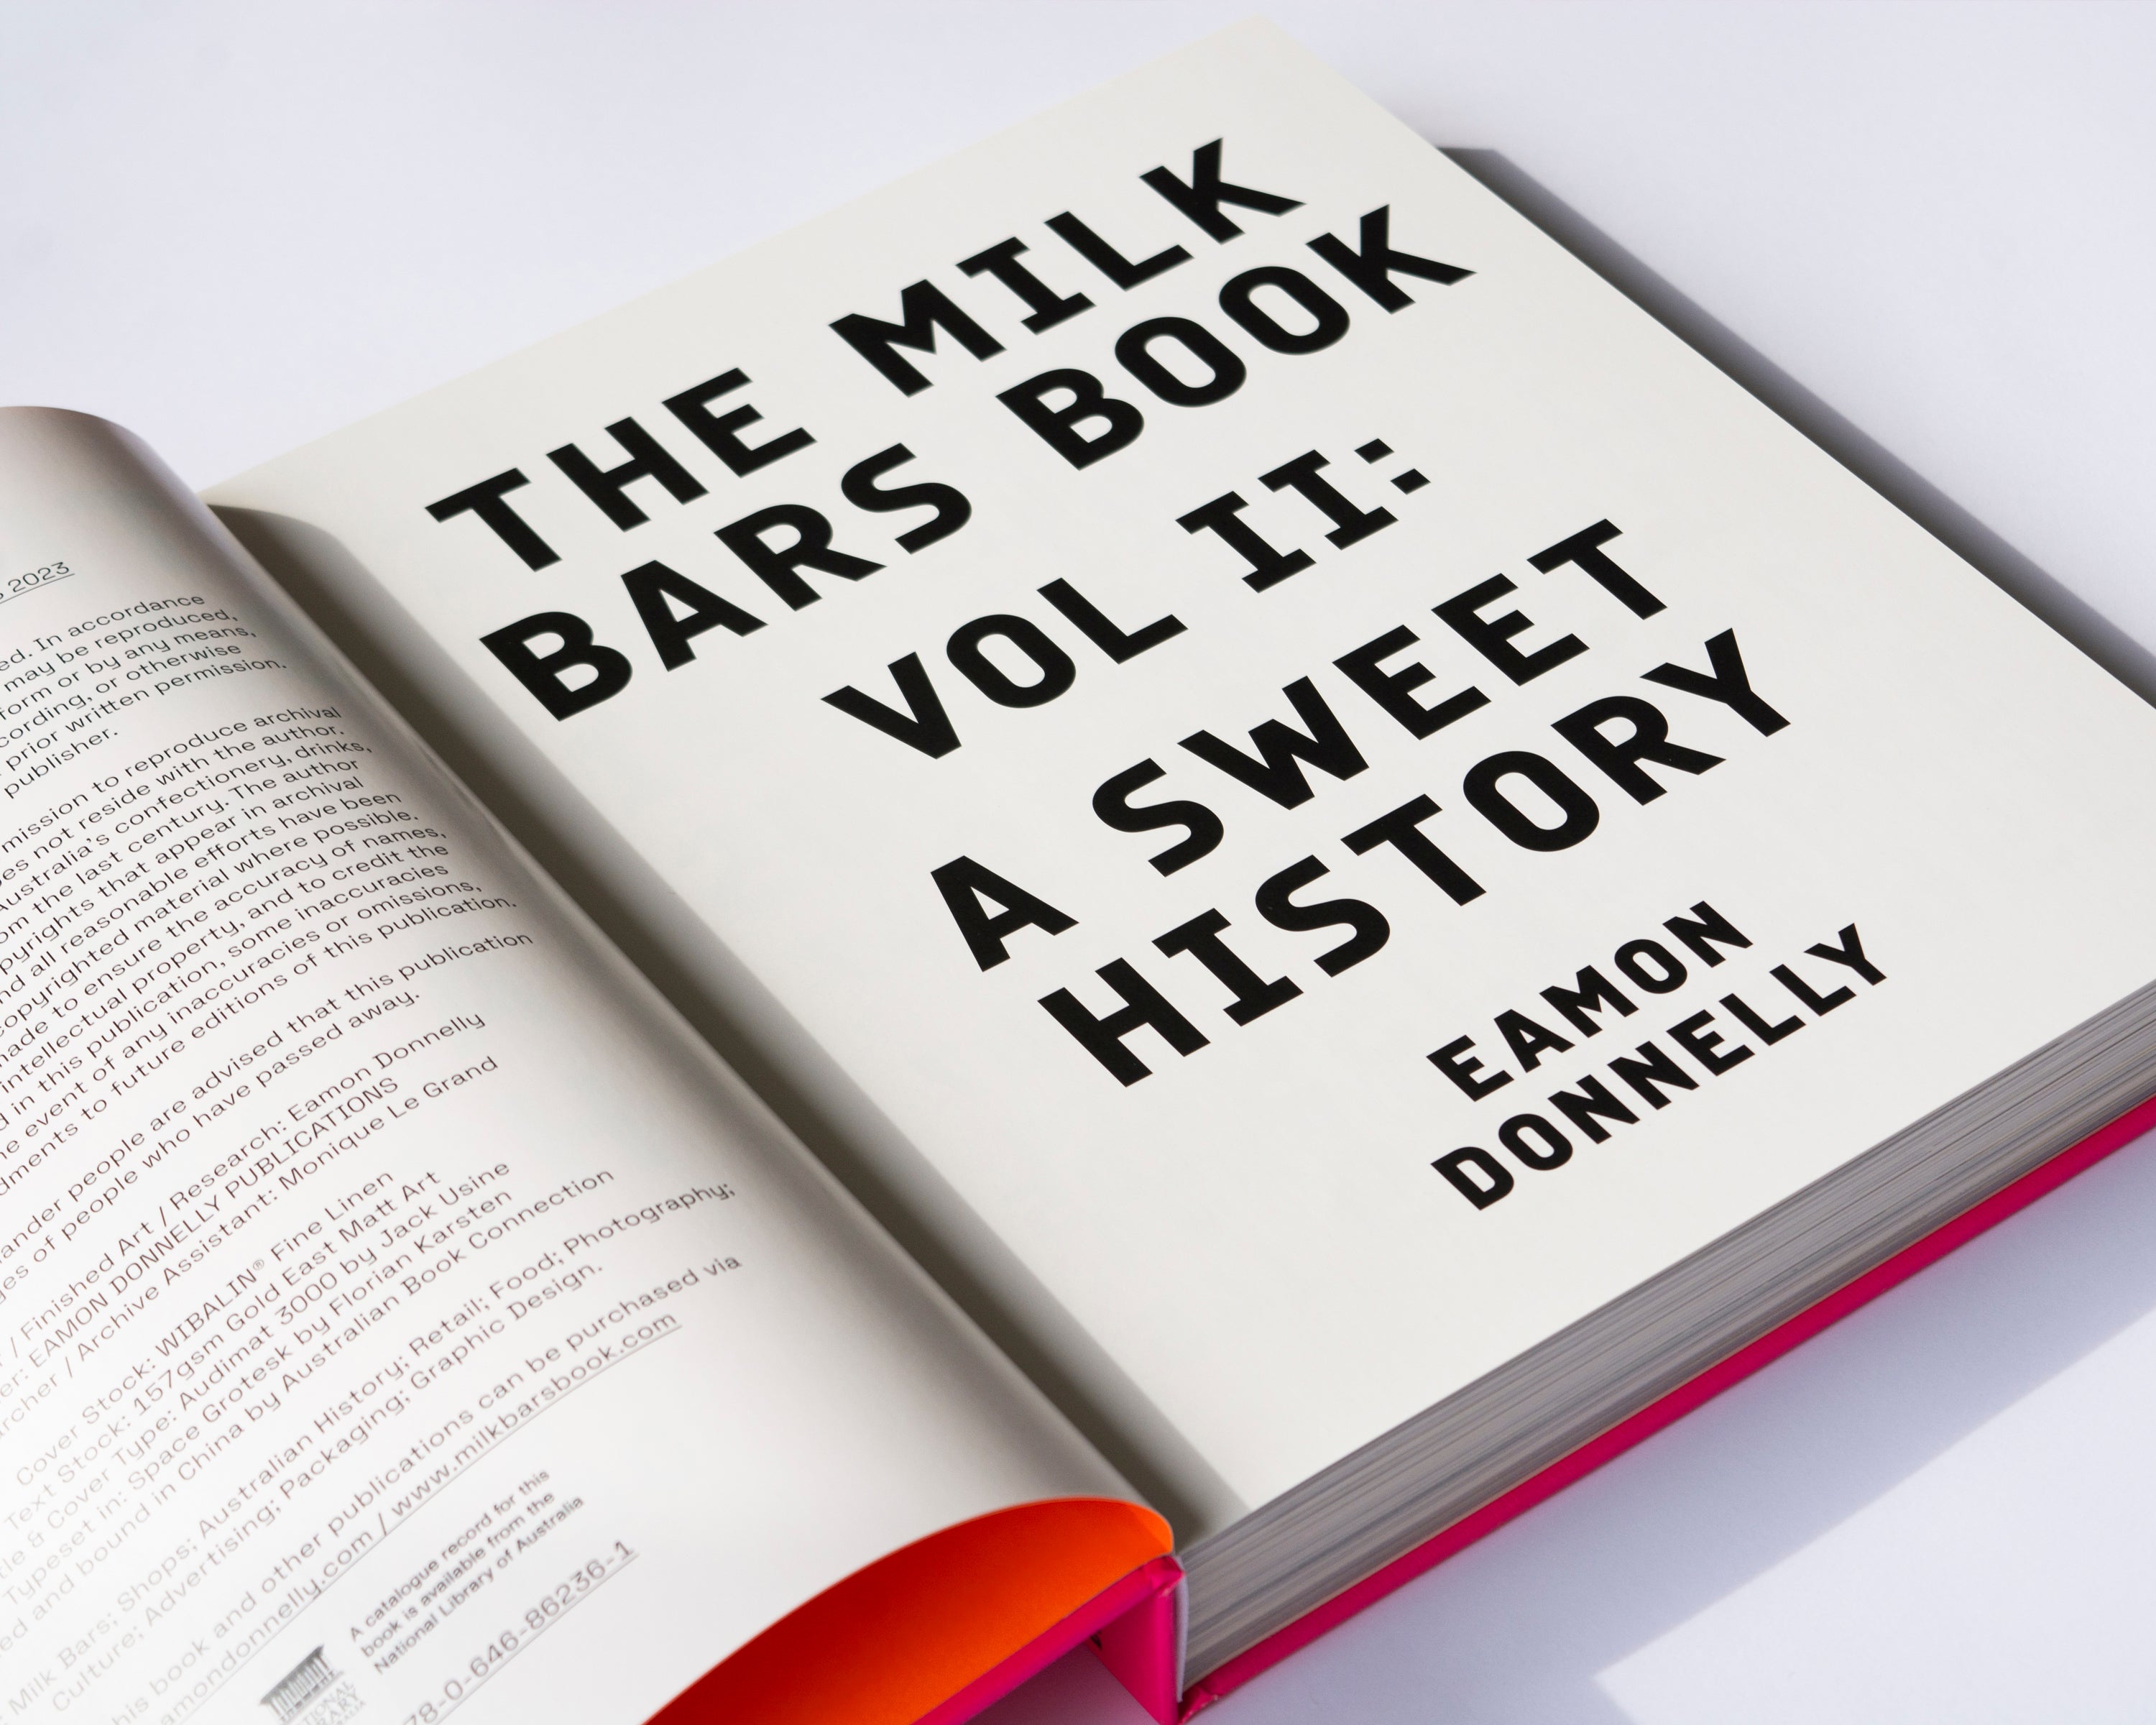 The Milk Bars Book. Volume II: A Sweet History [Raspberry Spider Cover Colour]